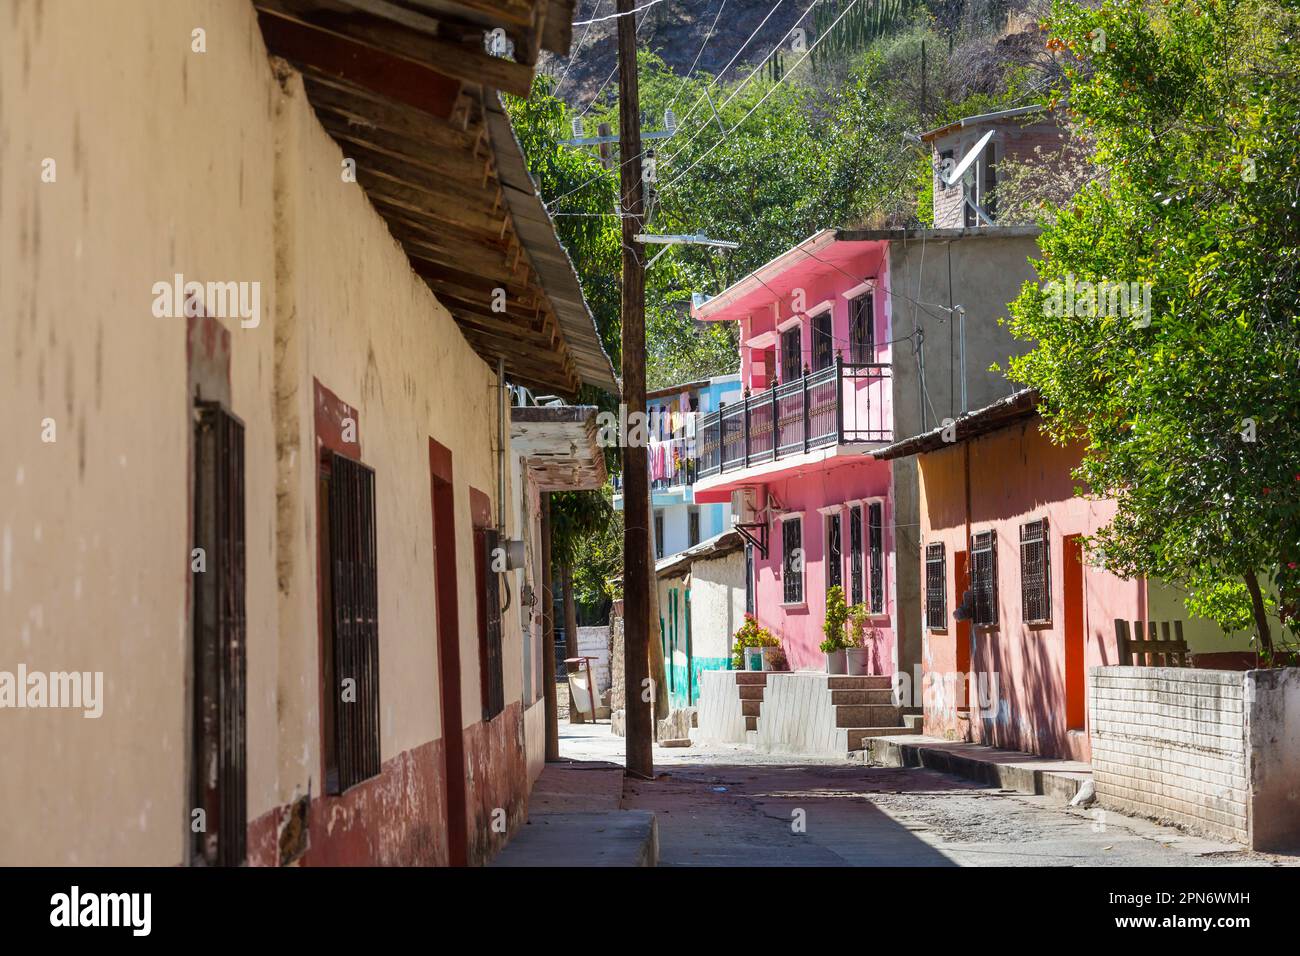 Colonial architecture in small mexican city Stock Photo